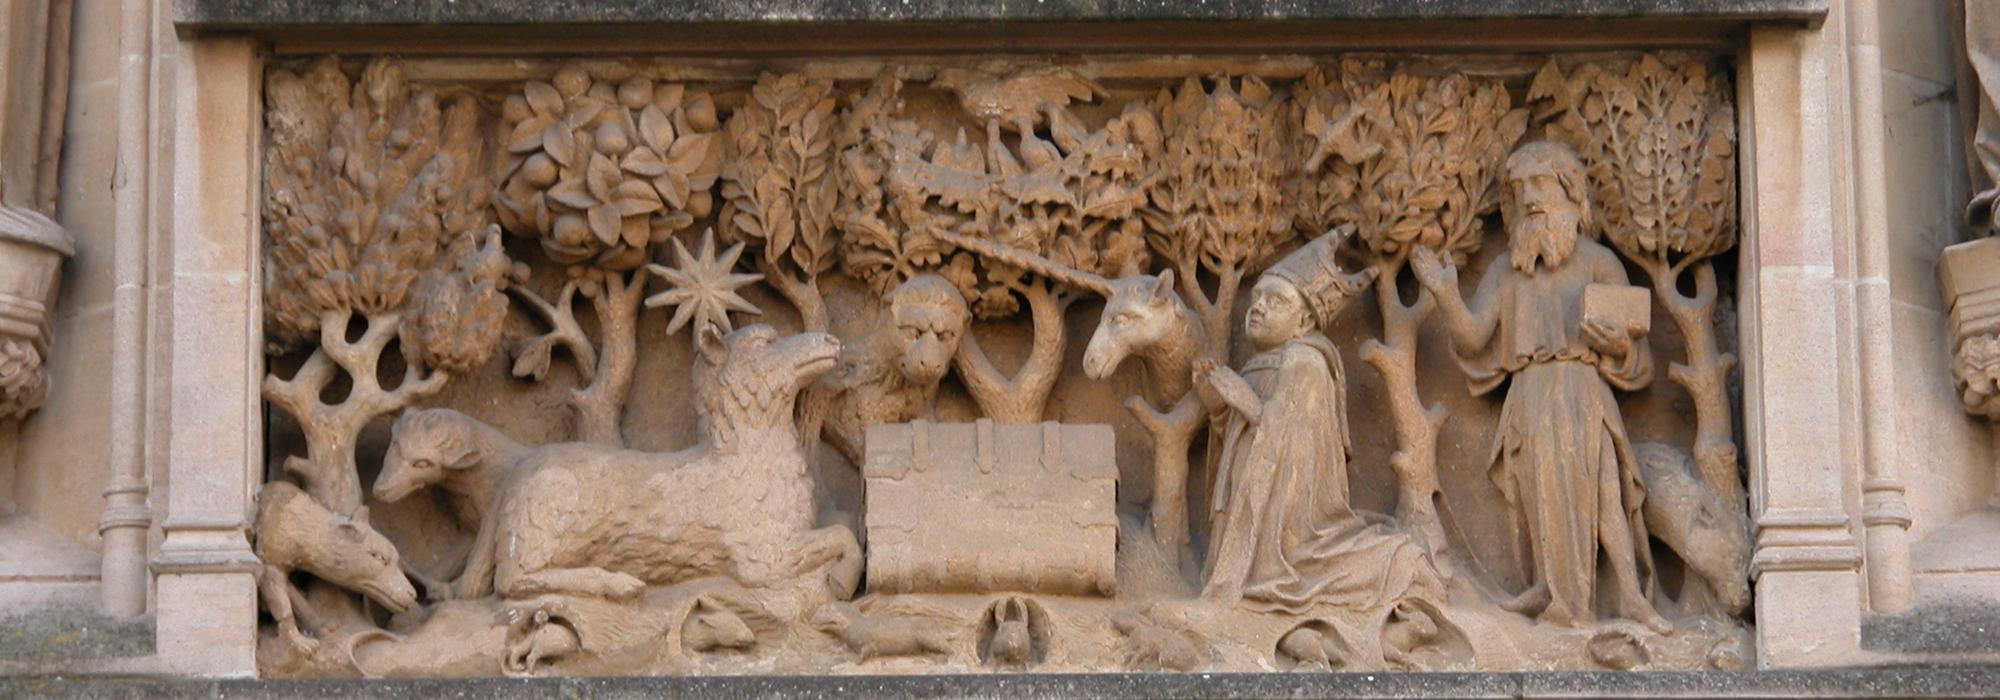 Central stone panel above the entrance to the College; it represents a book with the Agnus Dei on one side and St John the Baptist and the founder on the other side set in a landscape background with various animals.